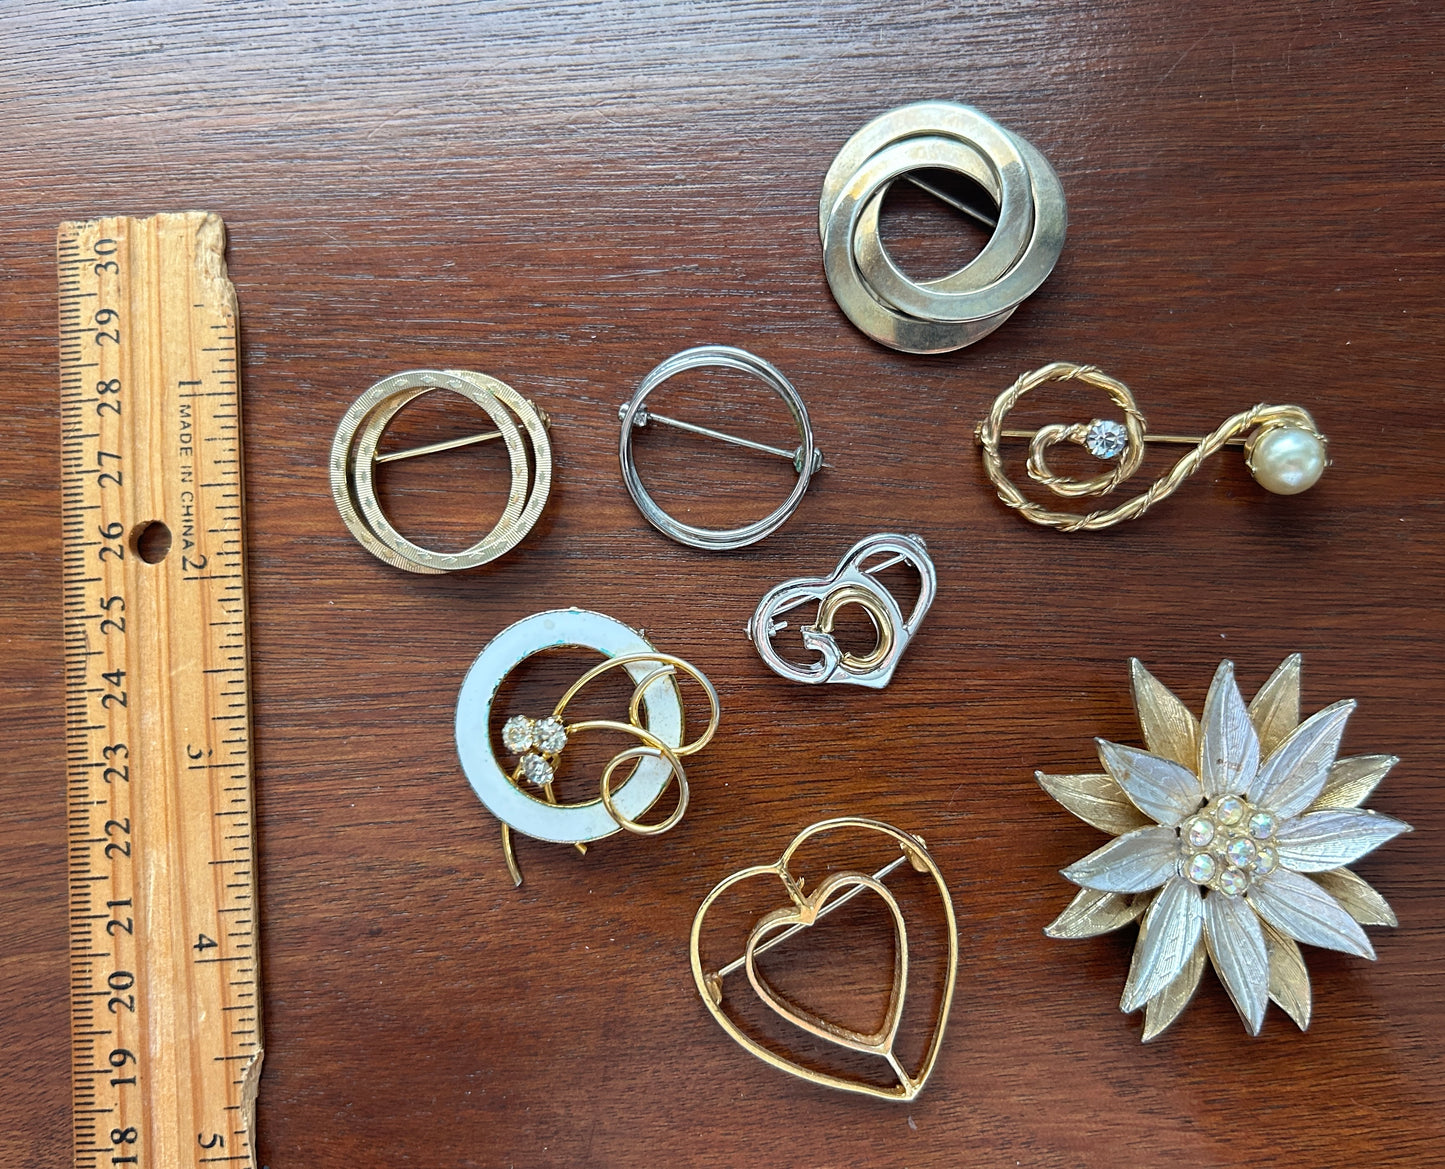 Lot of 8 Vintage Brooches Pins Gold Silver Tone Rhinestone Hearts Enamel Flowers